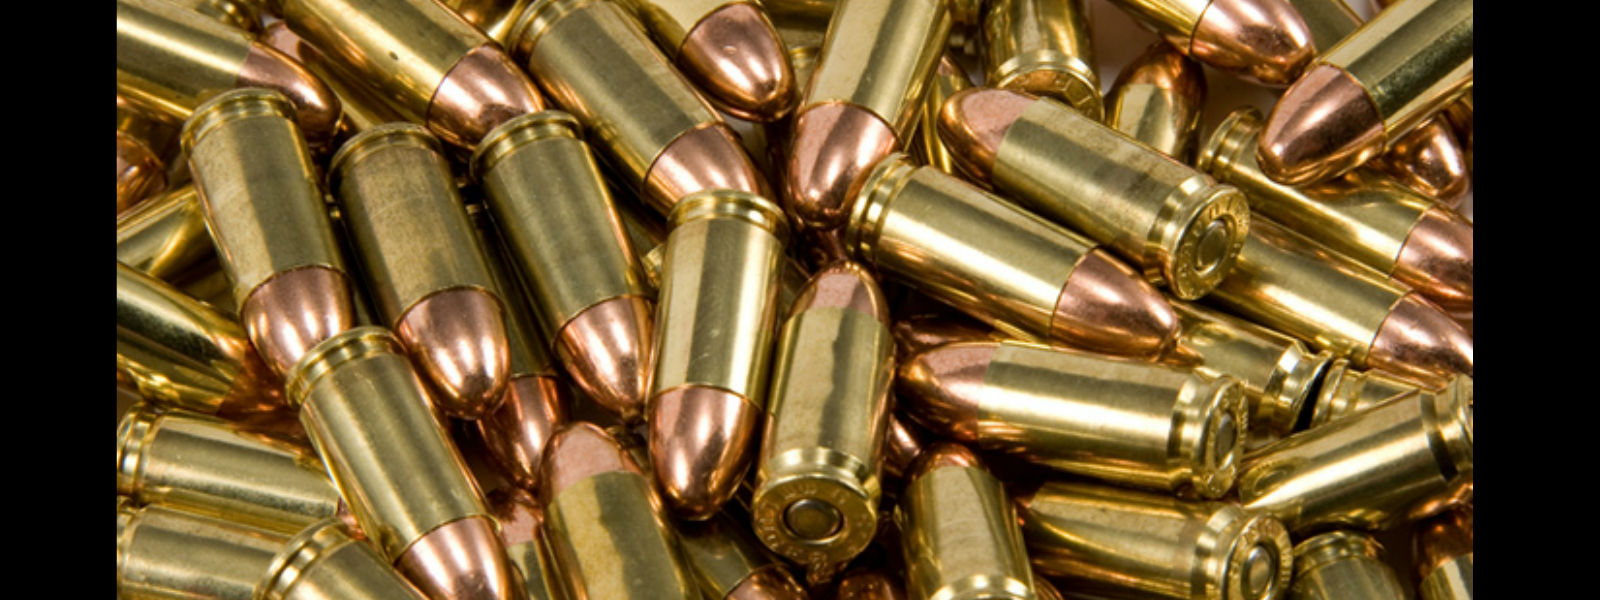 Stock of Ammunition discovered from Puttalam